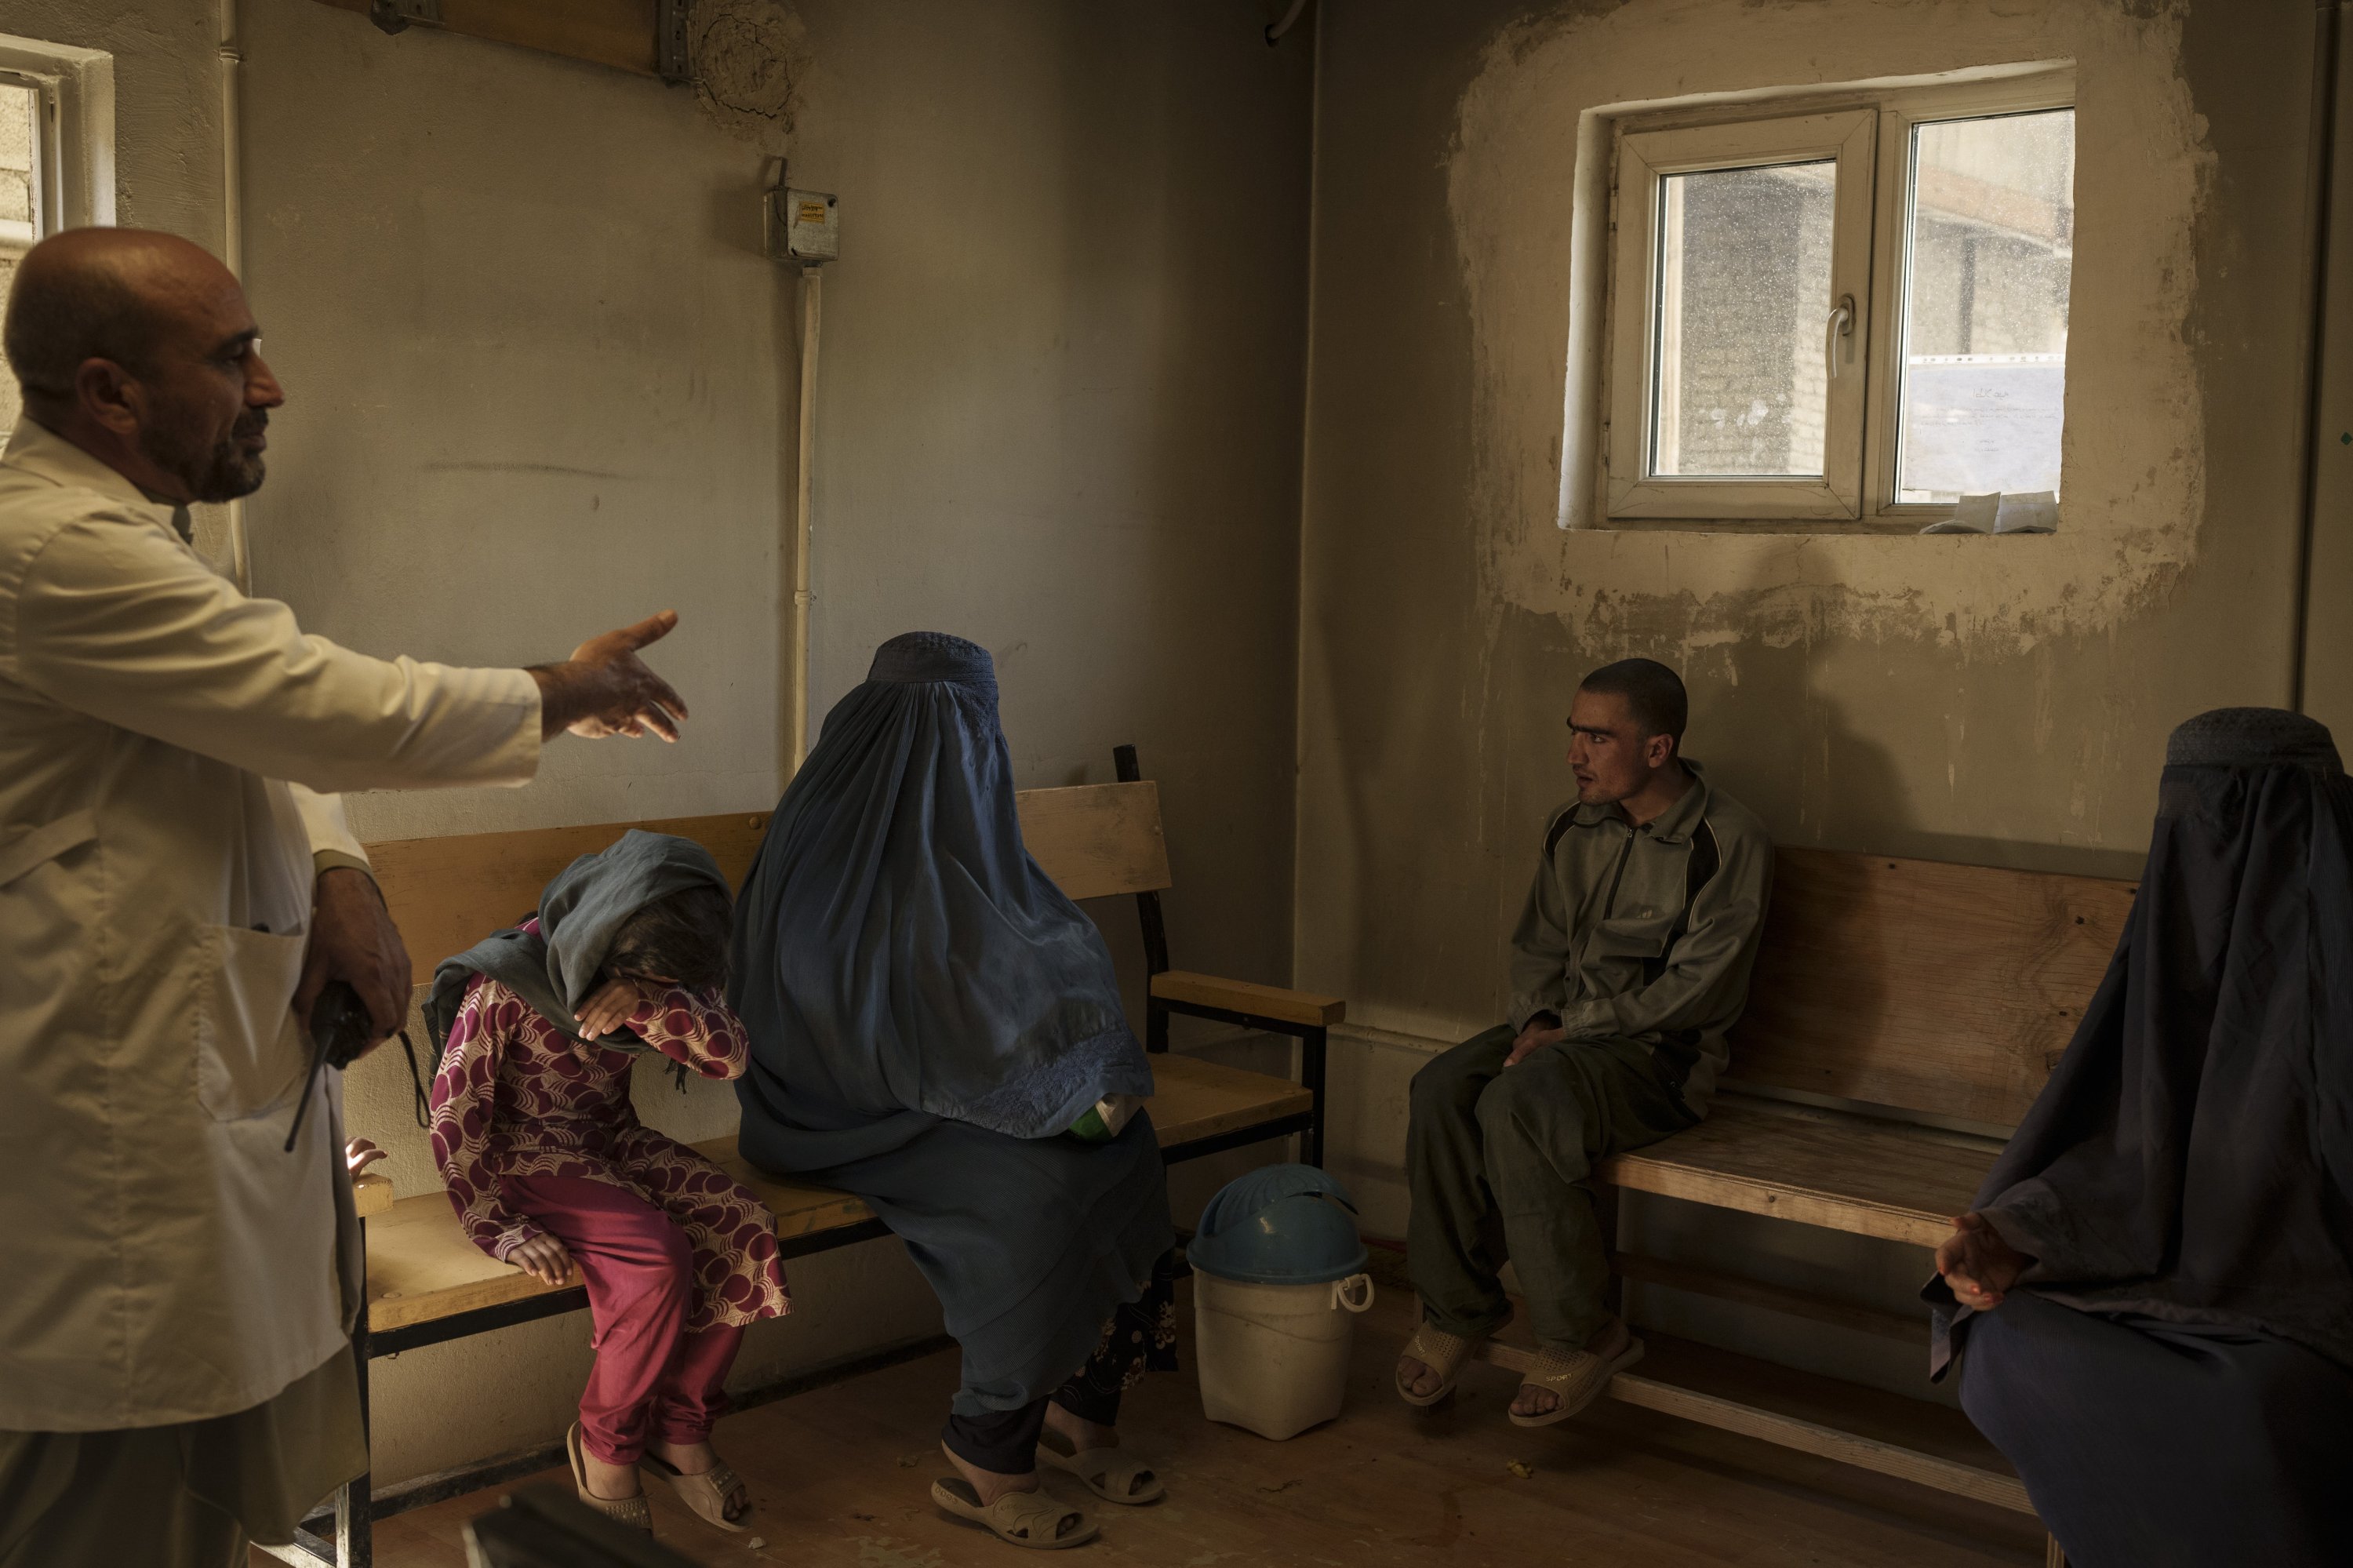 Dr. Wahedullah Koshan (L) gestures as he talks to Sitara (C) after she reunited with her 21-year-old son who was taken to the Avicenna Medical Hospital for Drug Treatment during a Taliban raid in Kabul, Afghanistan, Oct. 4, 2021. (AP Photo)